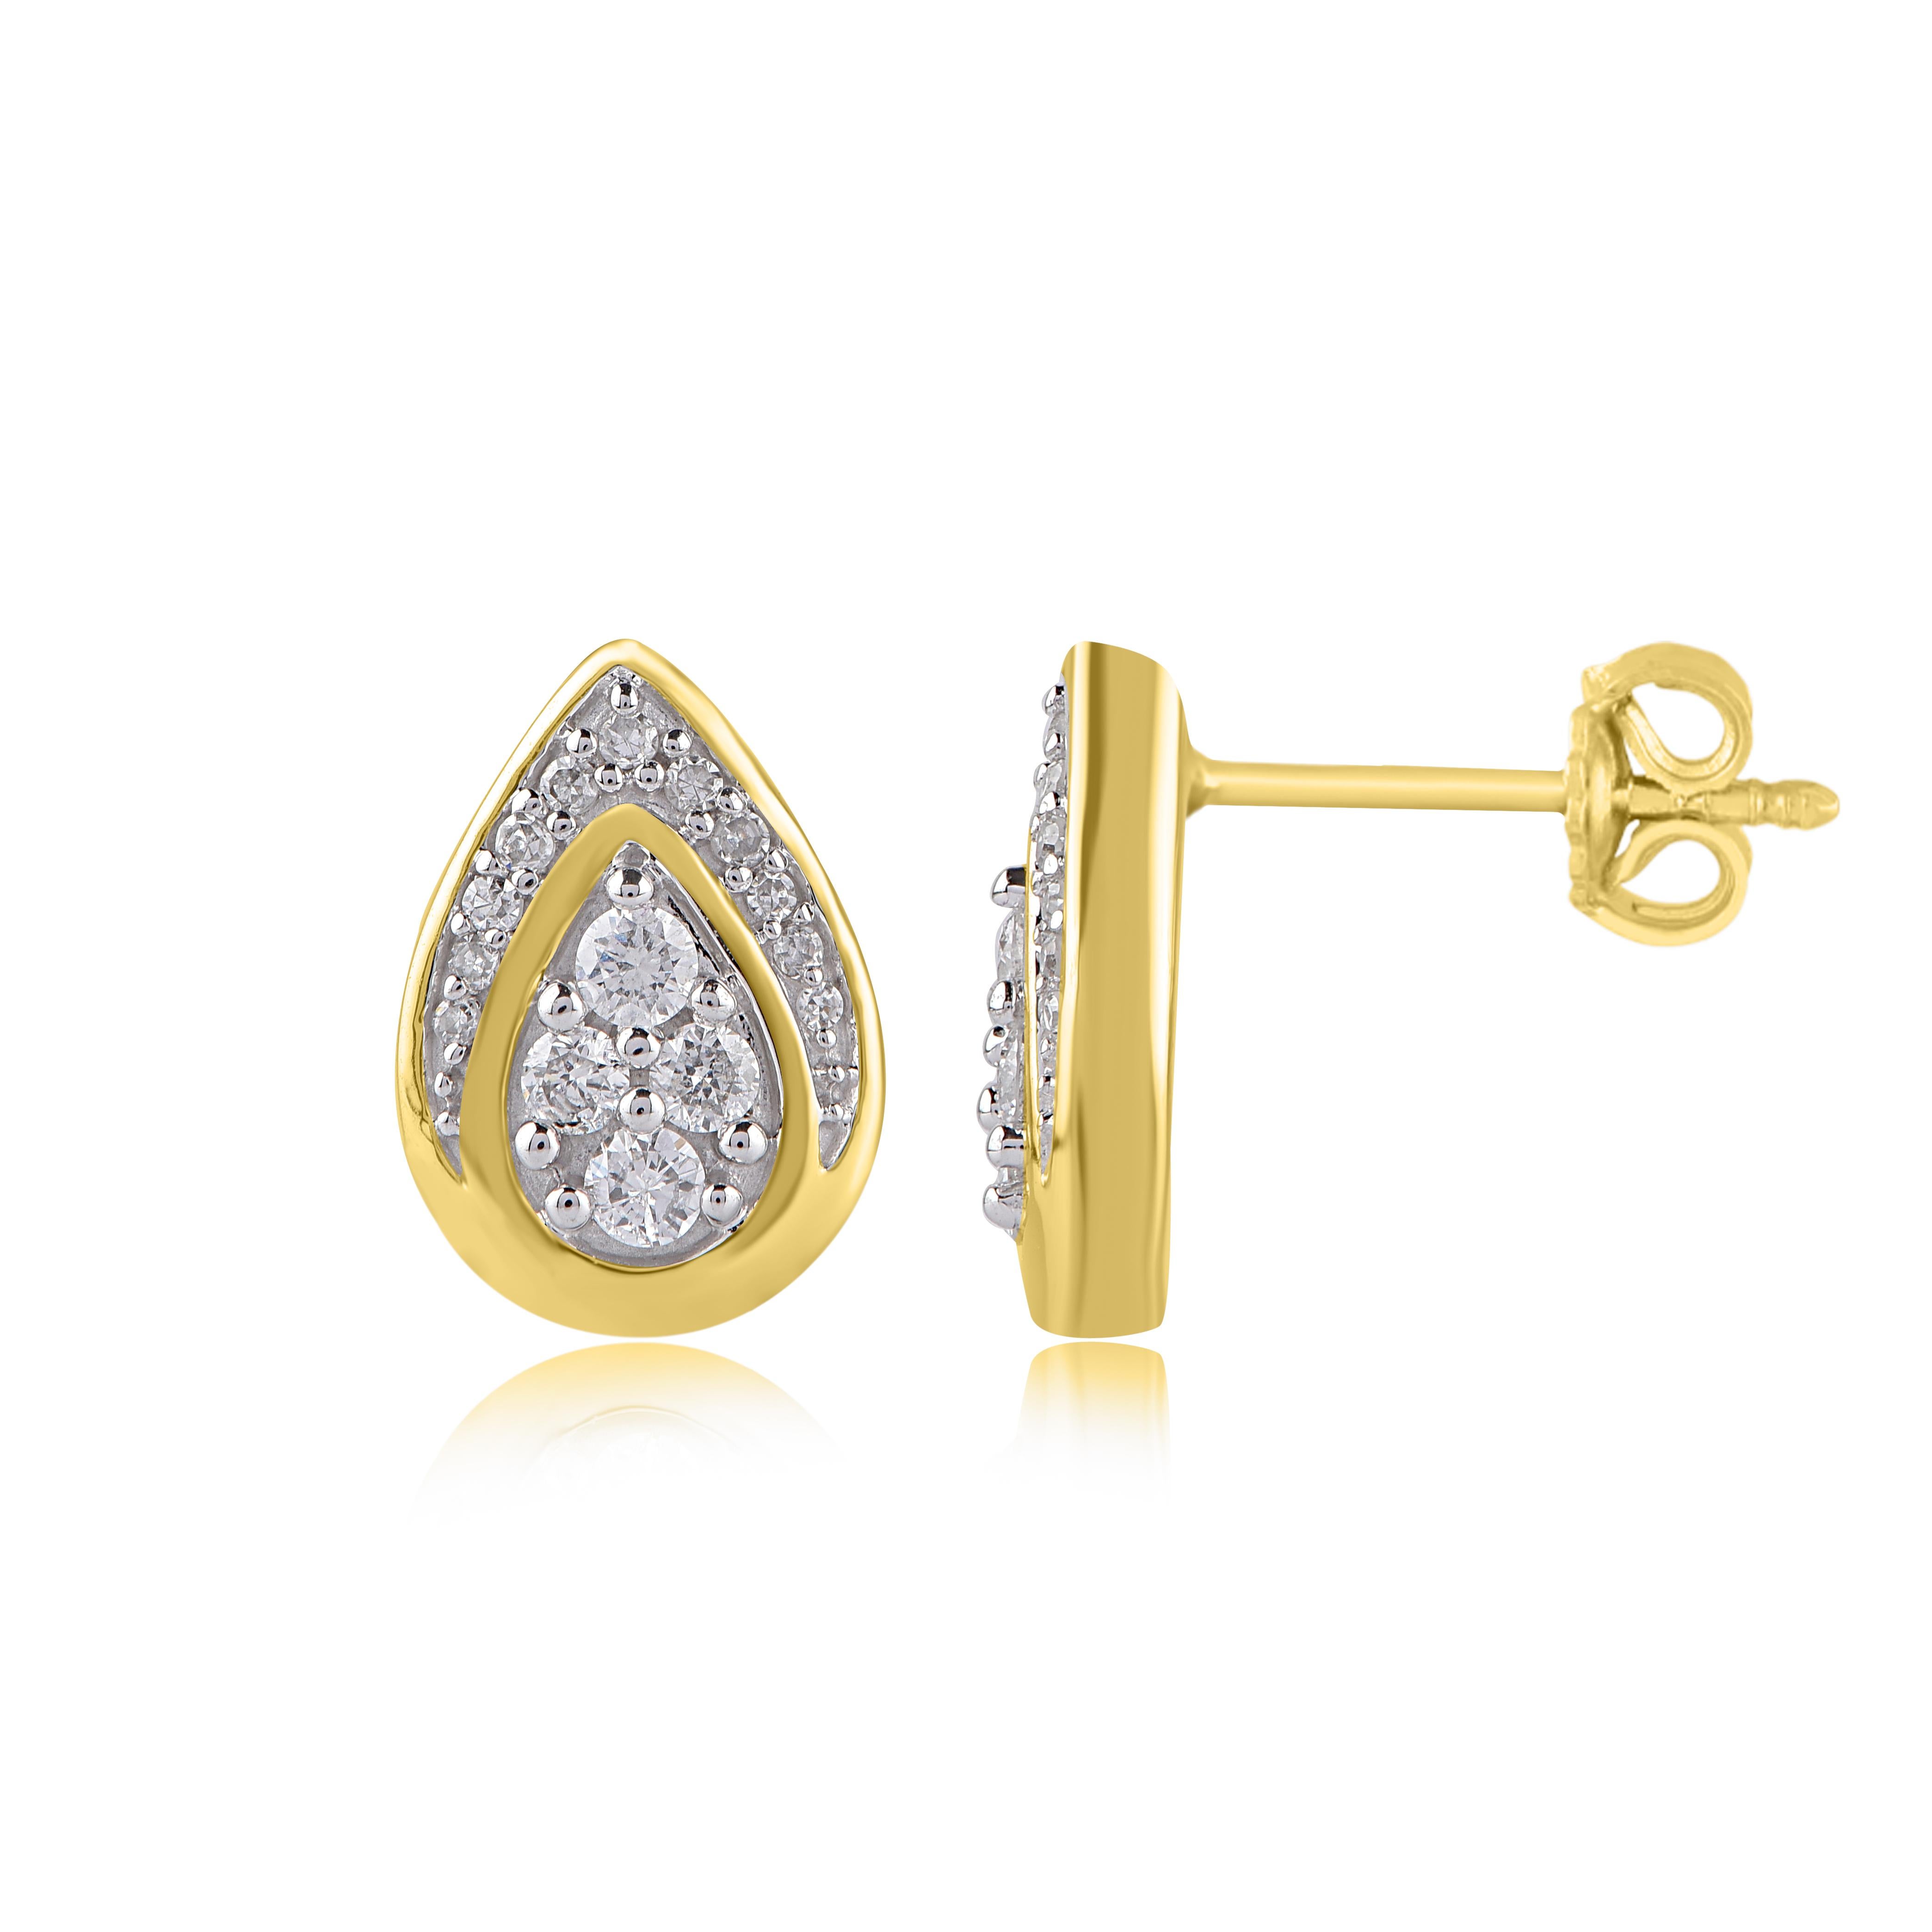 A sparkling delight, these diamond teardrop earrings fit her charming aesthetic. Embellished with 30 round brilliant cut and single cut diamond set in pave setting, and dazzles with H-I color I2 clarity. Captivating with 0.25 Carat and crafted by